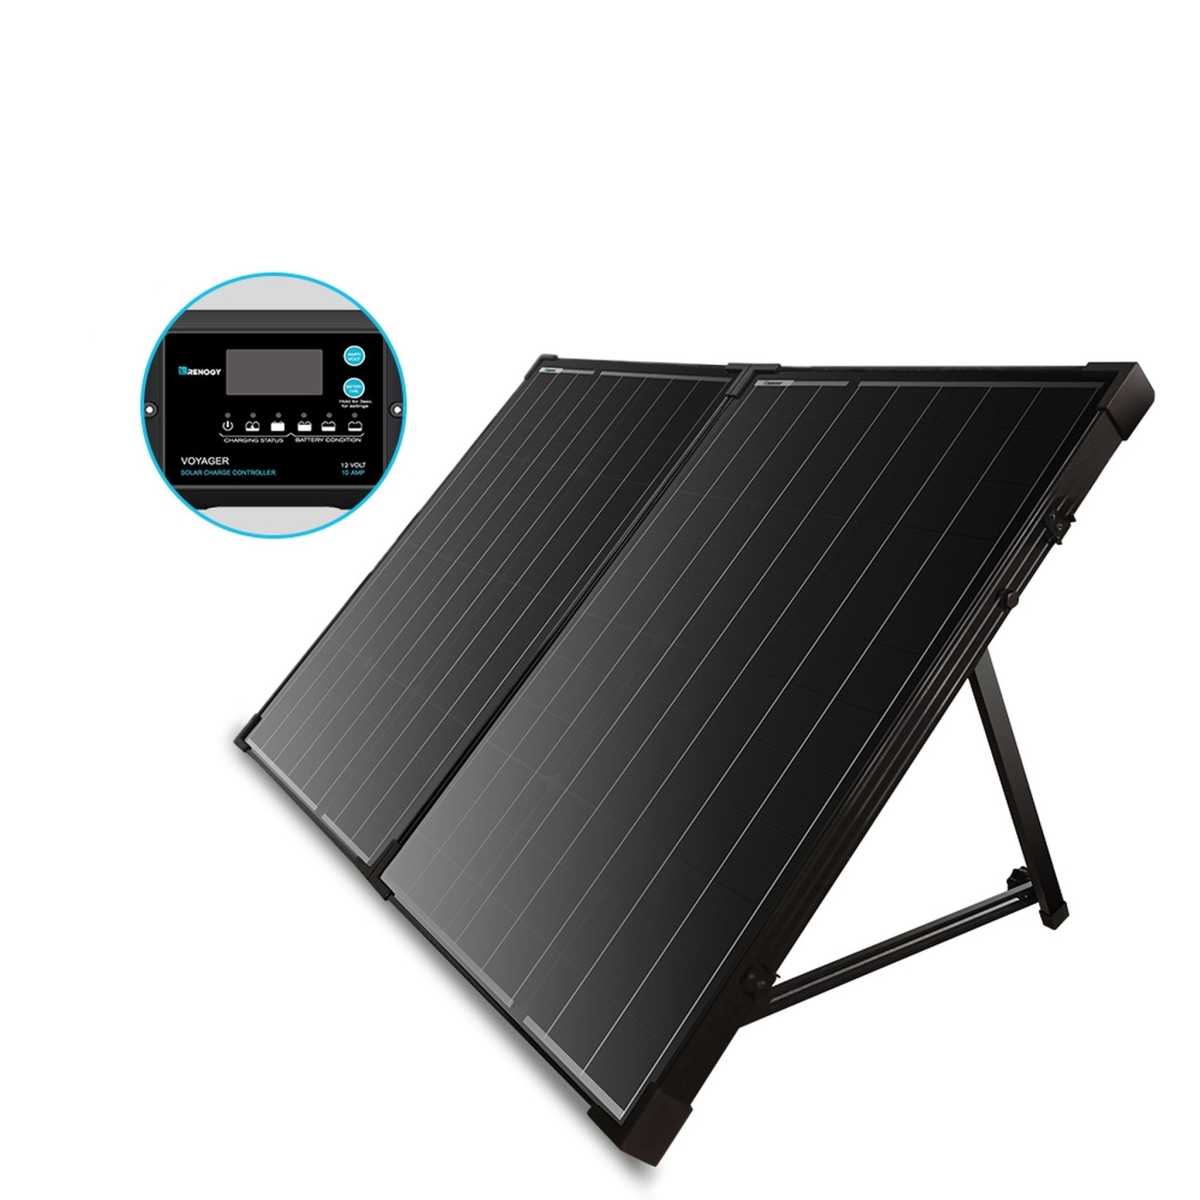 R-stcs-100d-voypg10 100 Watt 12v Monocrystalline Foldable Solar Suitcase With 10a Voyager Charge Controller